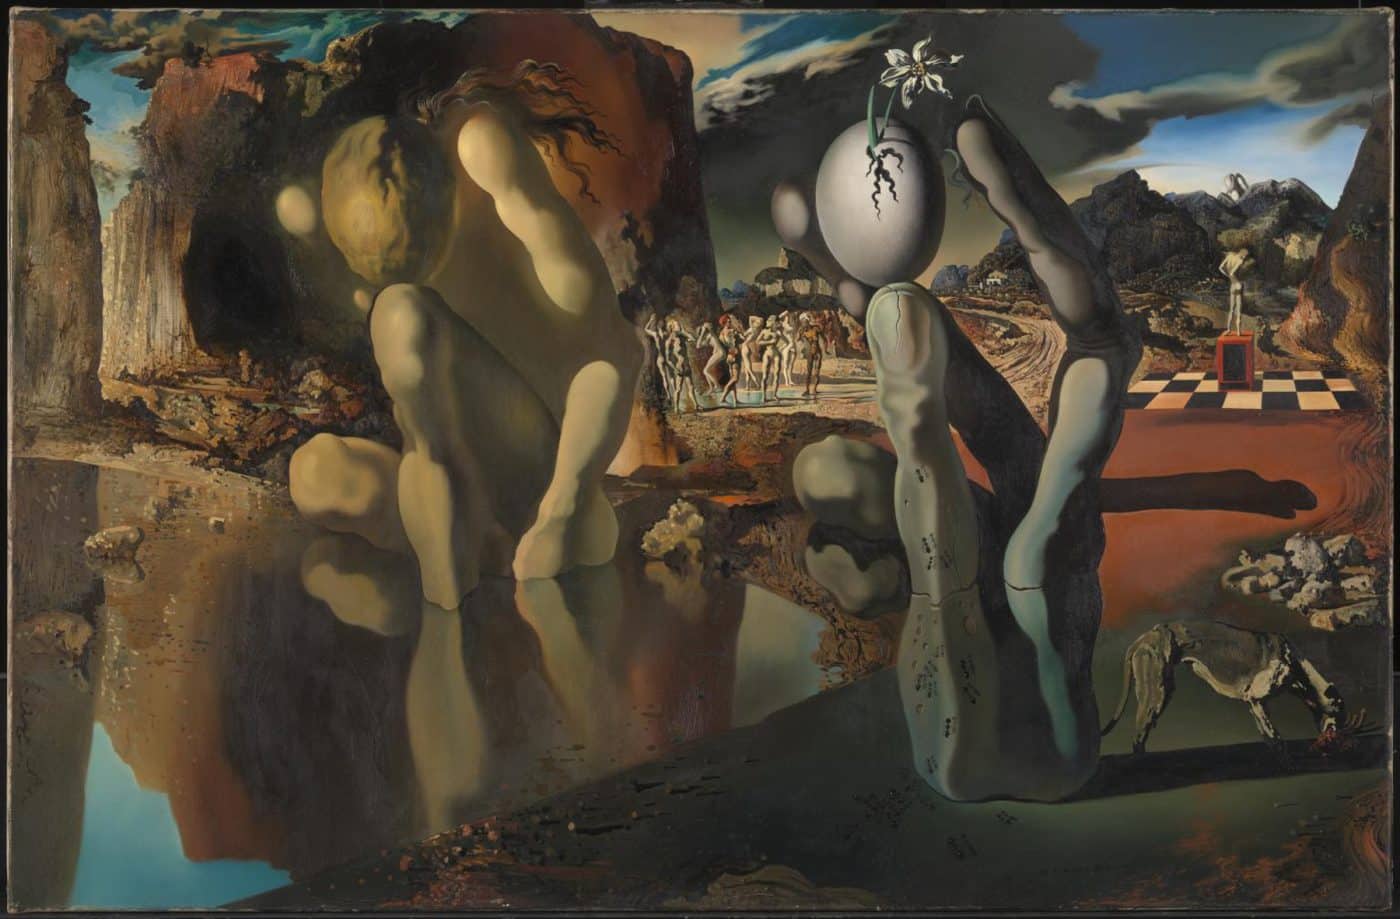 A Salvador Dalí landscape painting with two giant hands composed of fingers and legs next to a body of water.